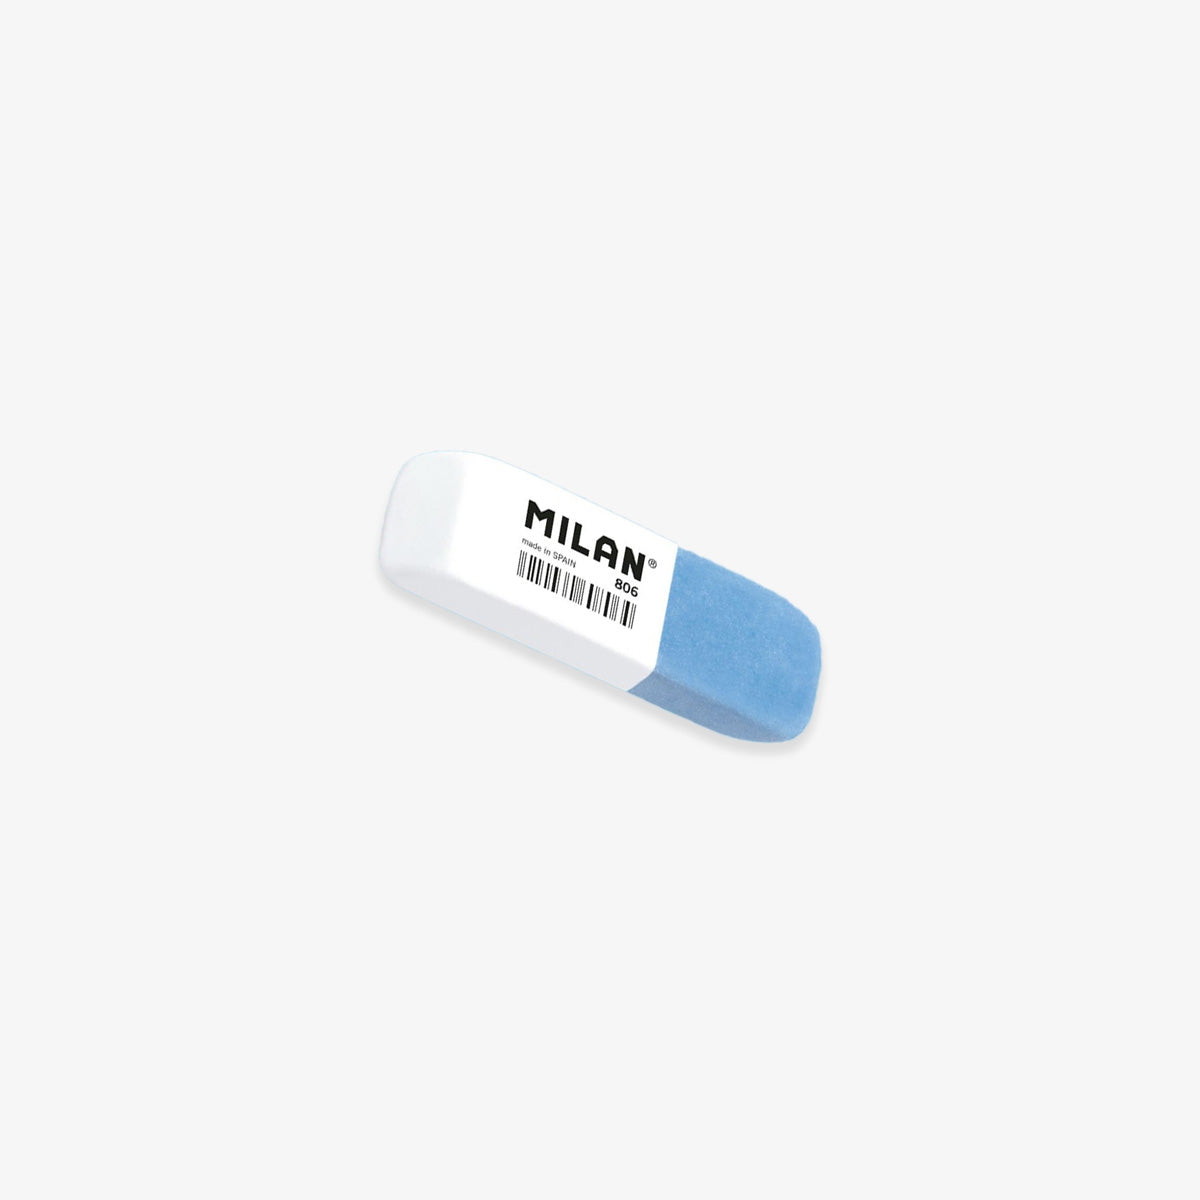 DOUBLE ERASER 806 // WHITE AND BLUE